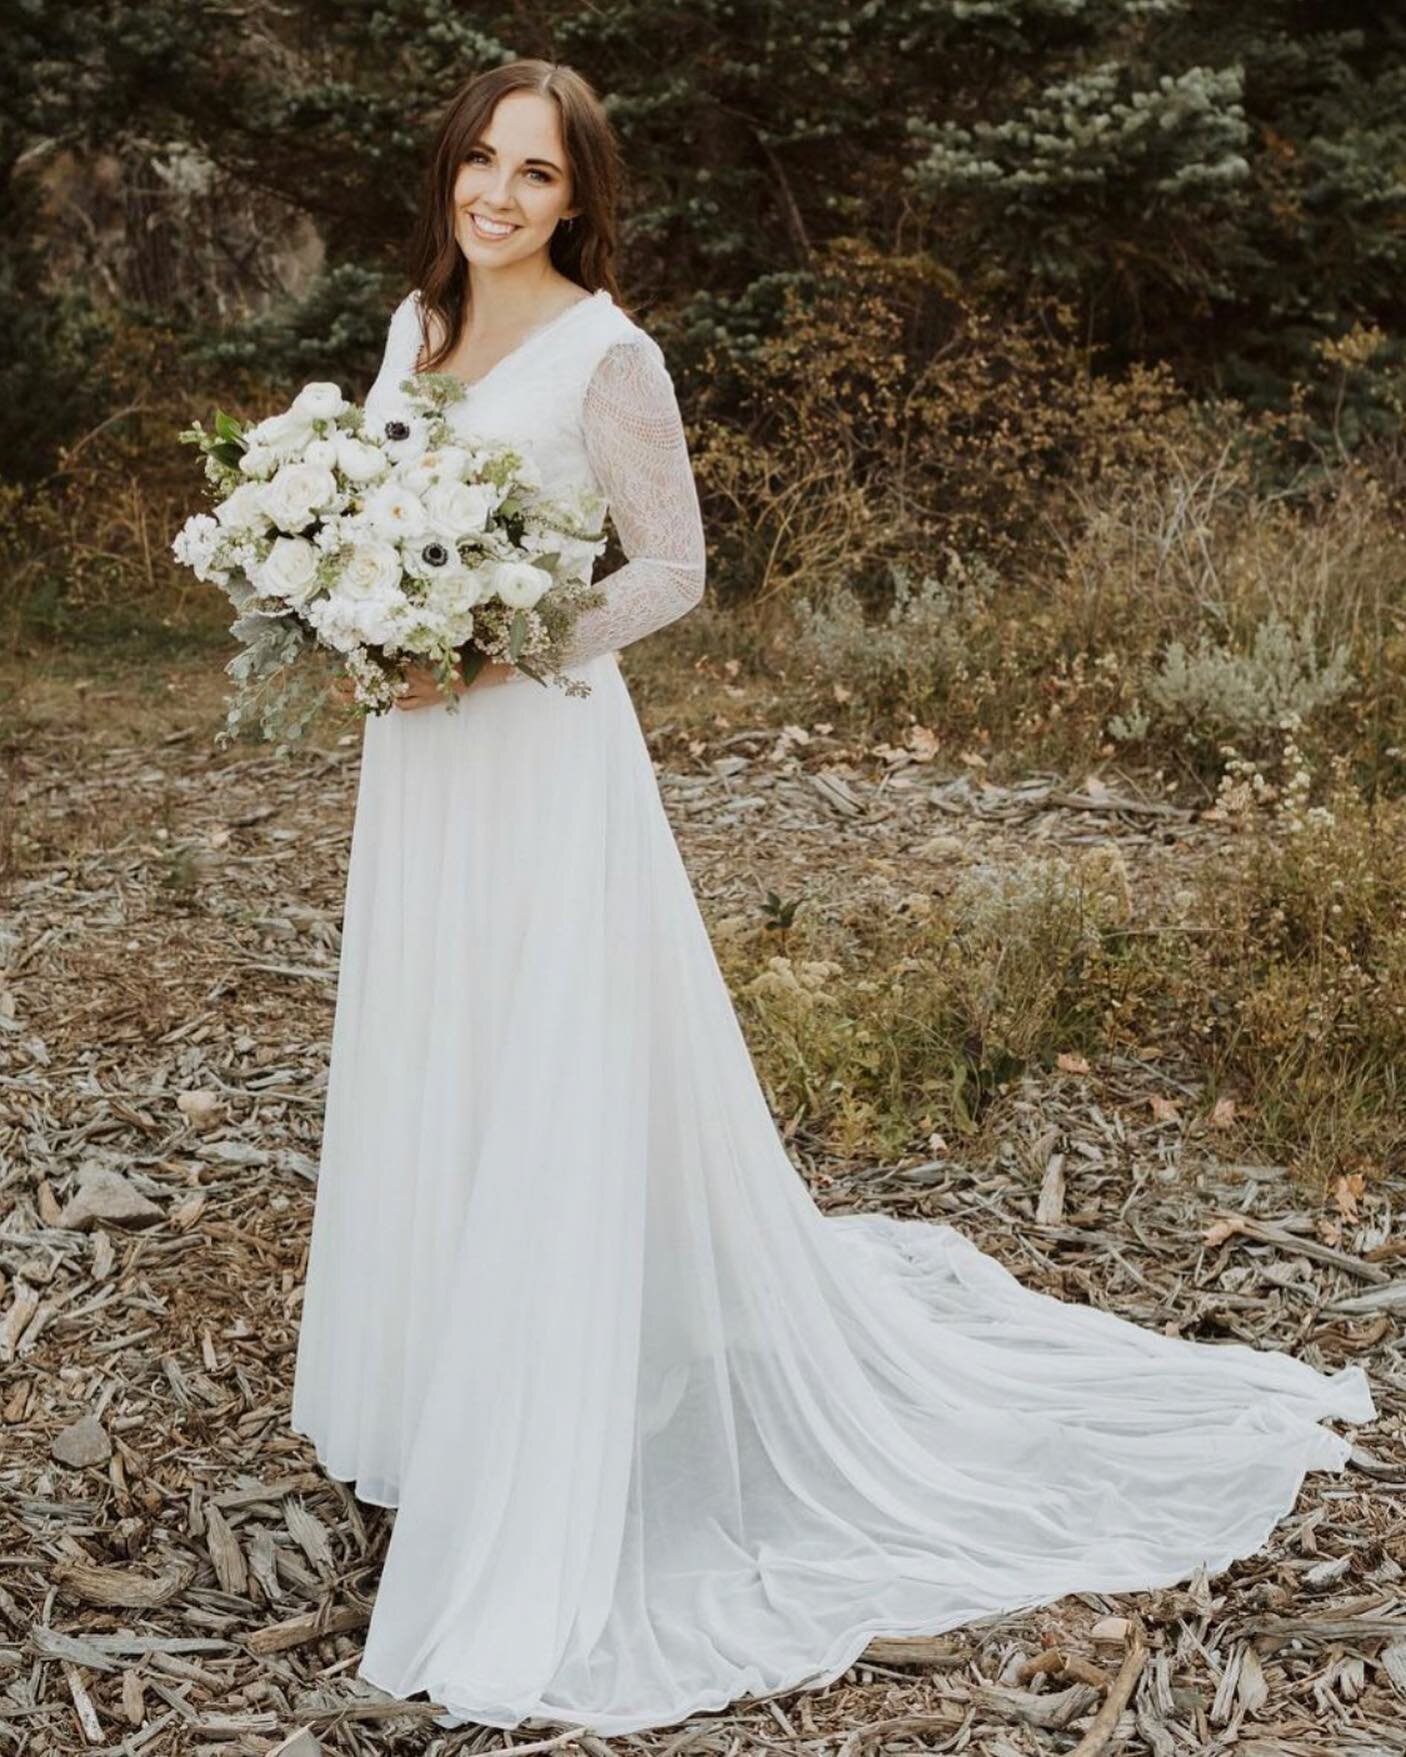 Here comes the bride, and what a stunning bride she was too!! Kaitlin is such a special woman. She is incredibly sweet, brilliant, stunningly beautiful, the dearest friend, and such a joy to be around. Wishing her a very happy birthday today!  Love y